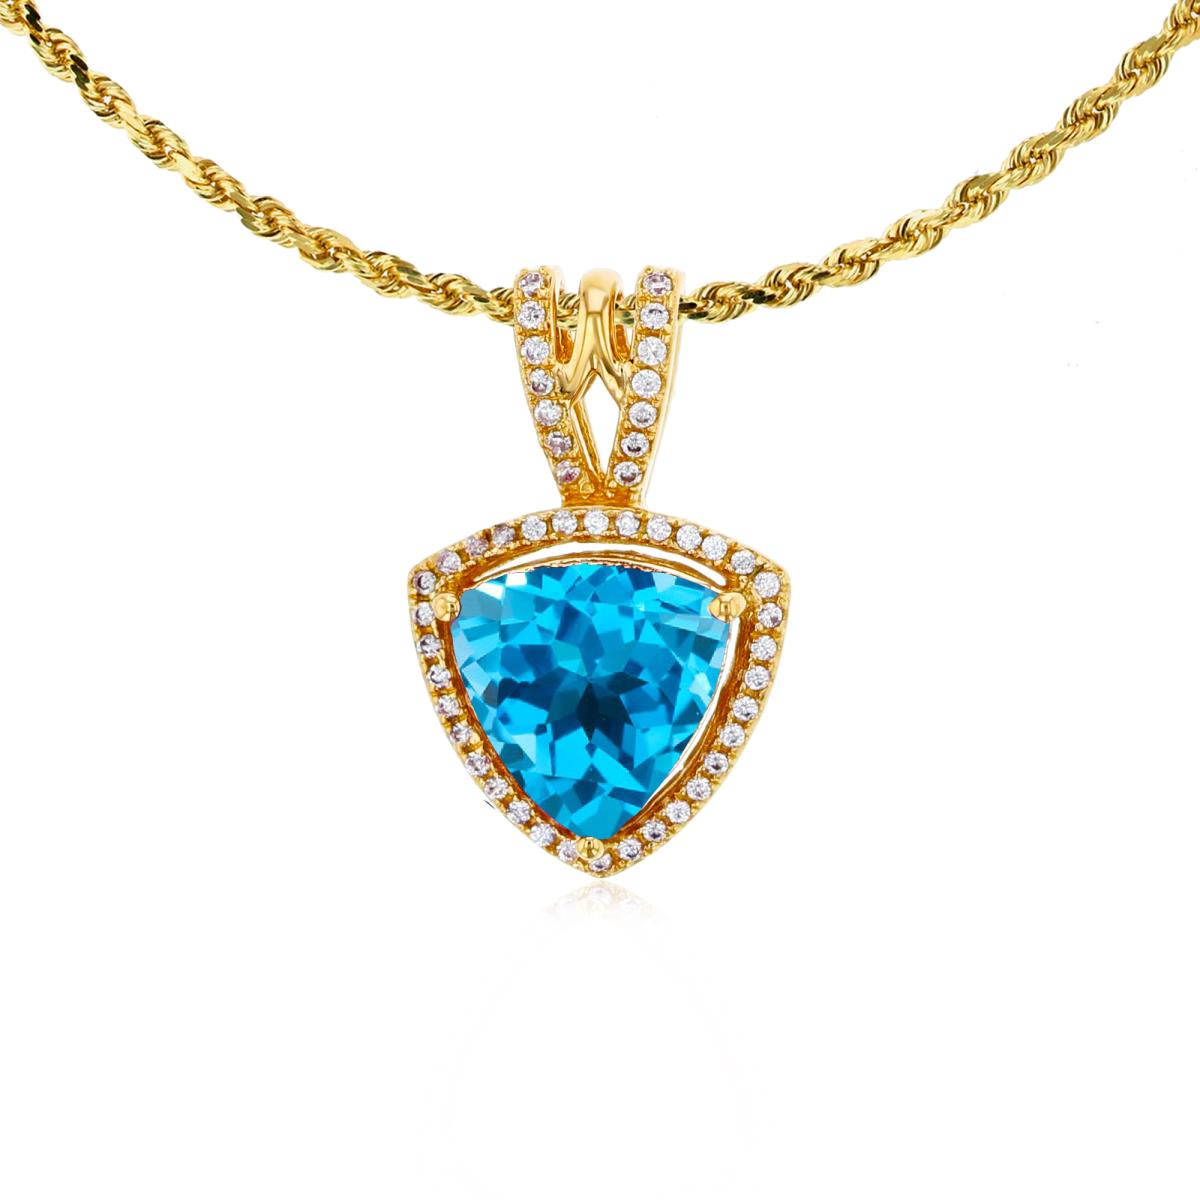 10K Yellow Gold 8mm Trillion Swiss Blue Topaz & 0.13 CTTW Diamonds Frame 18" Rope Chain Necklace